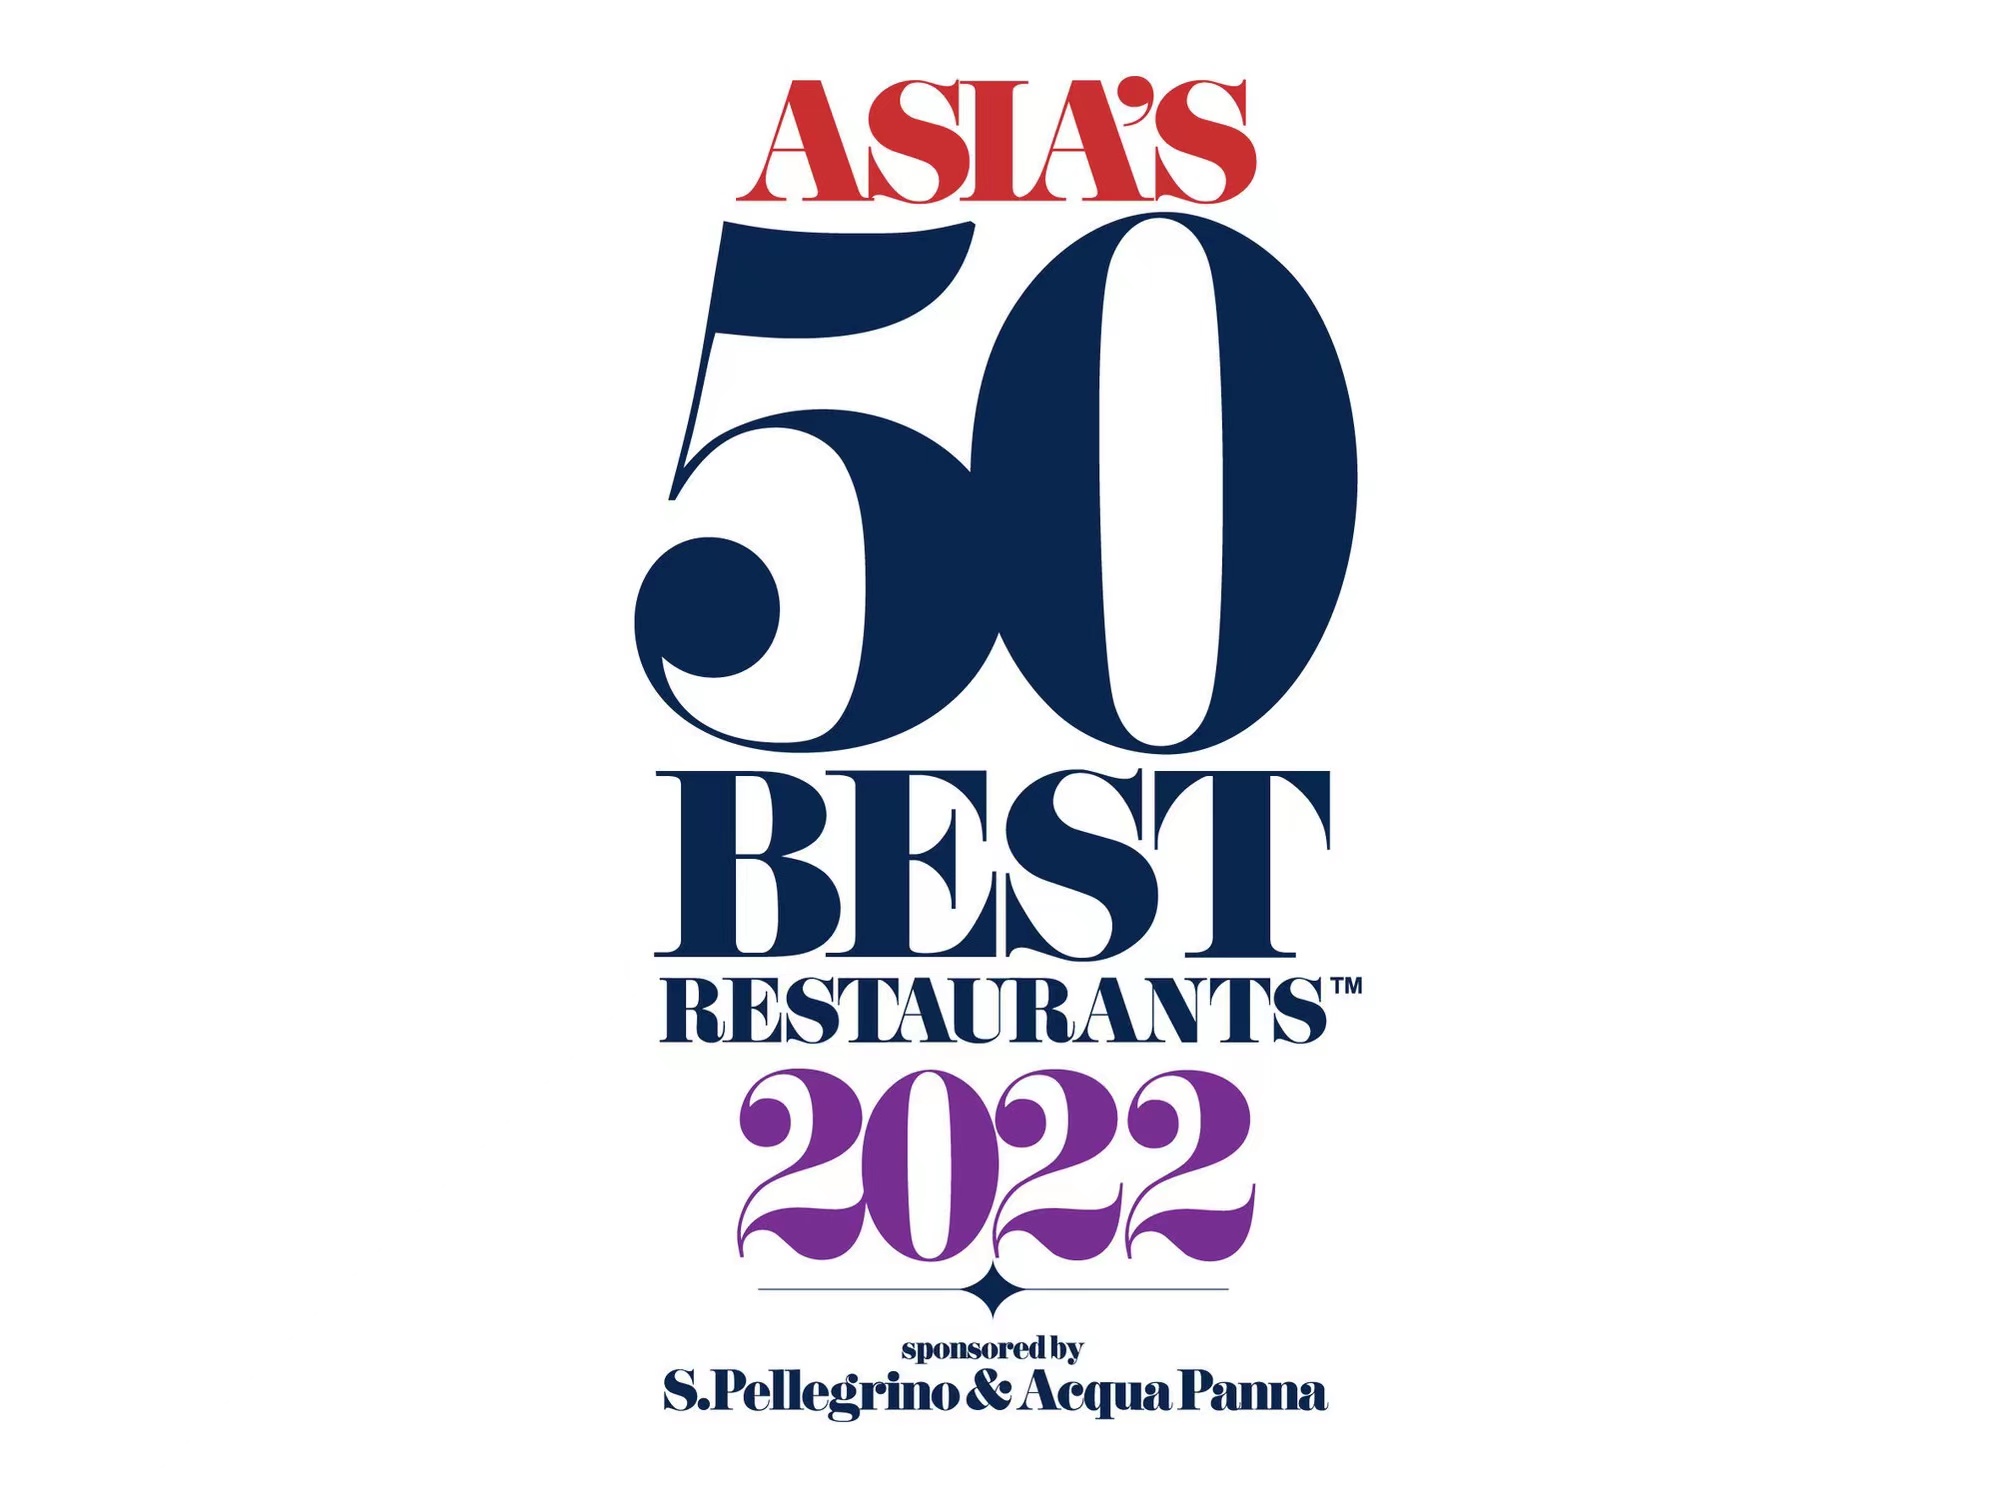 37 Greater China Restaurants Make Asia's 50 Best Top 100 List